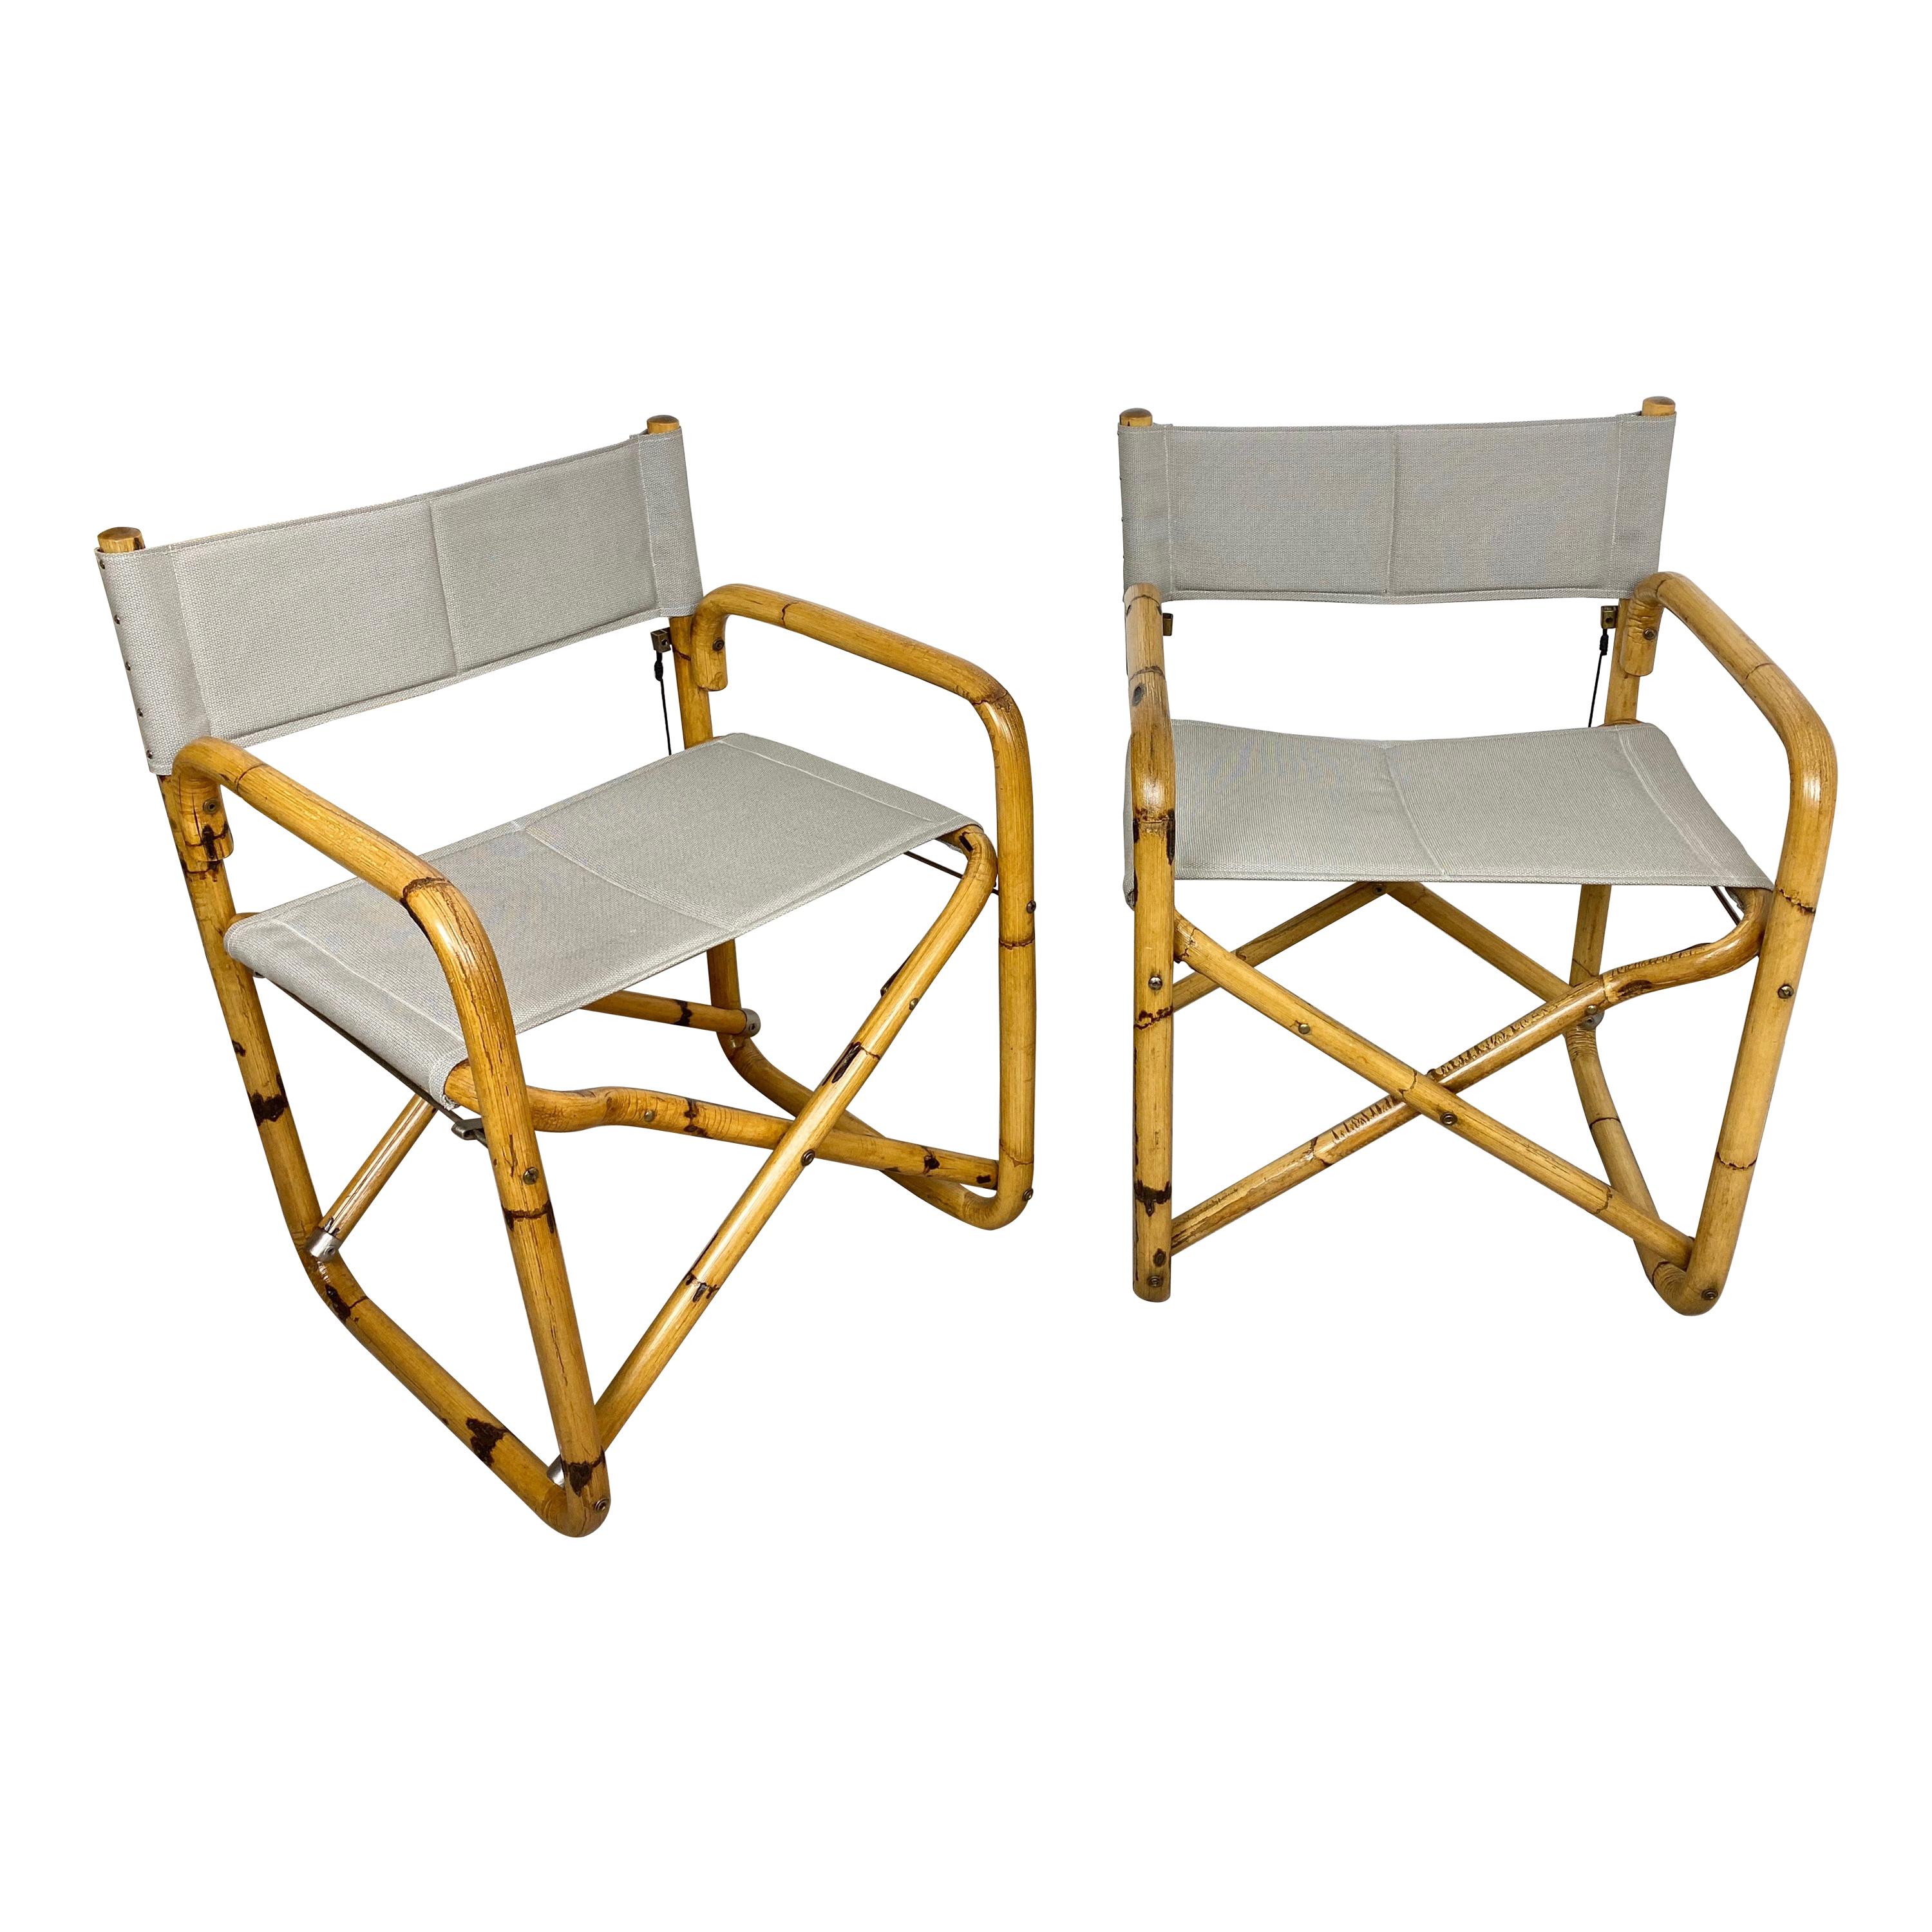 Pair of 1960s Bamboo Folding Directors Chair, Italy